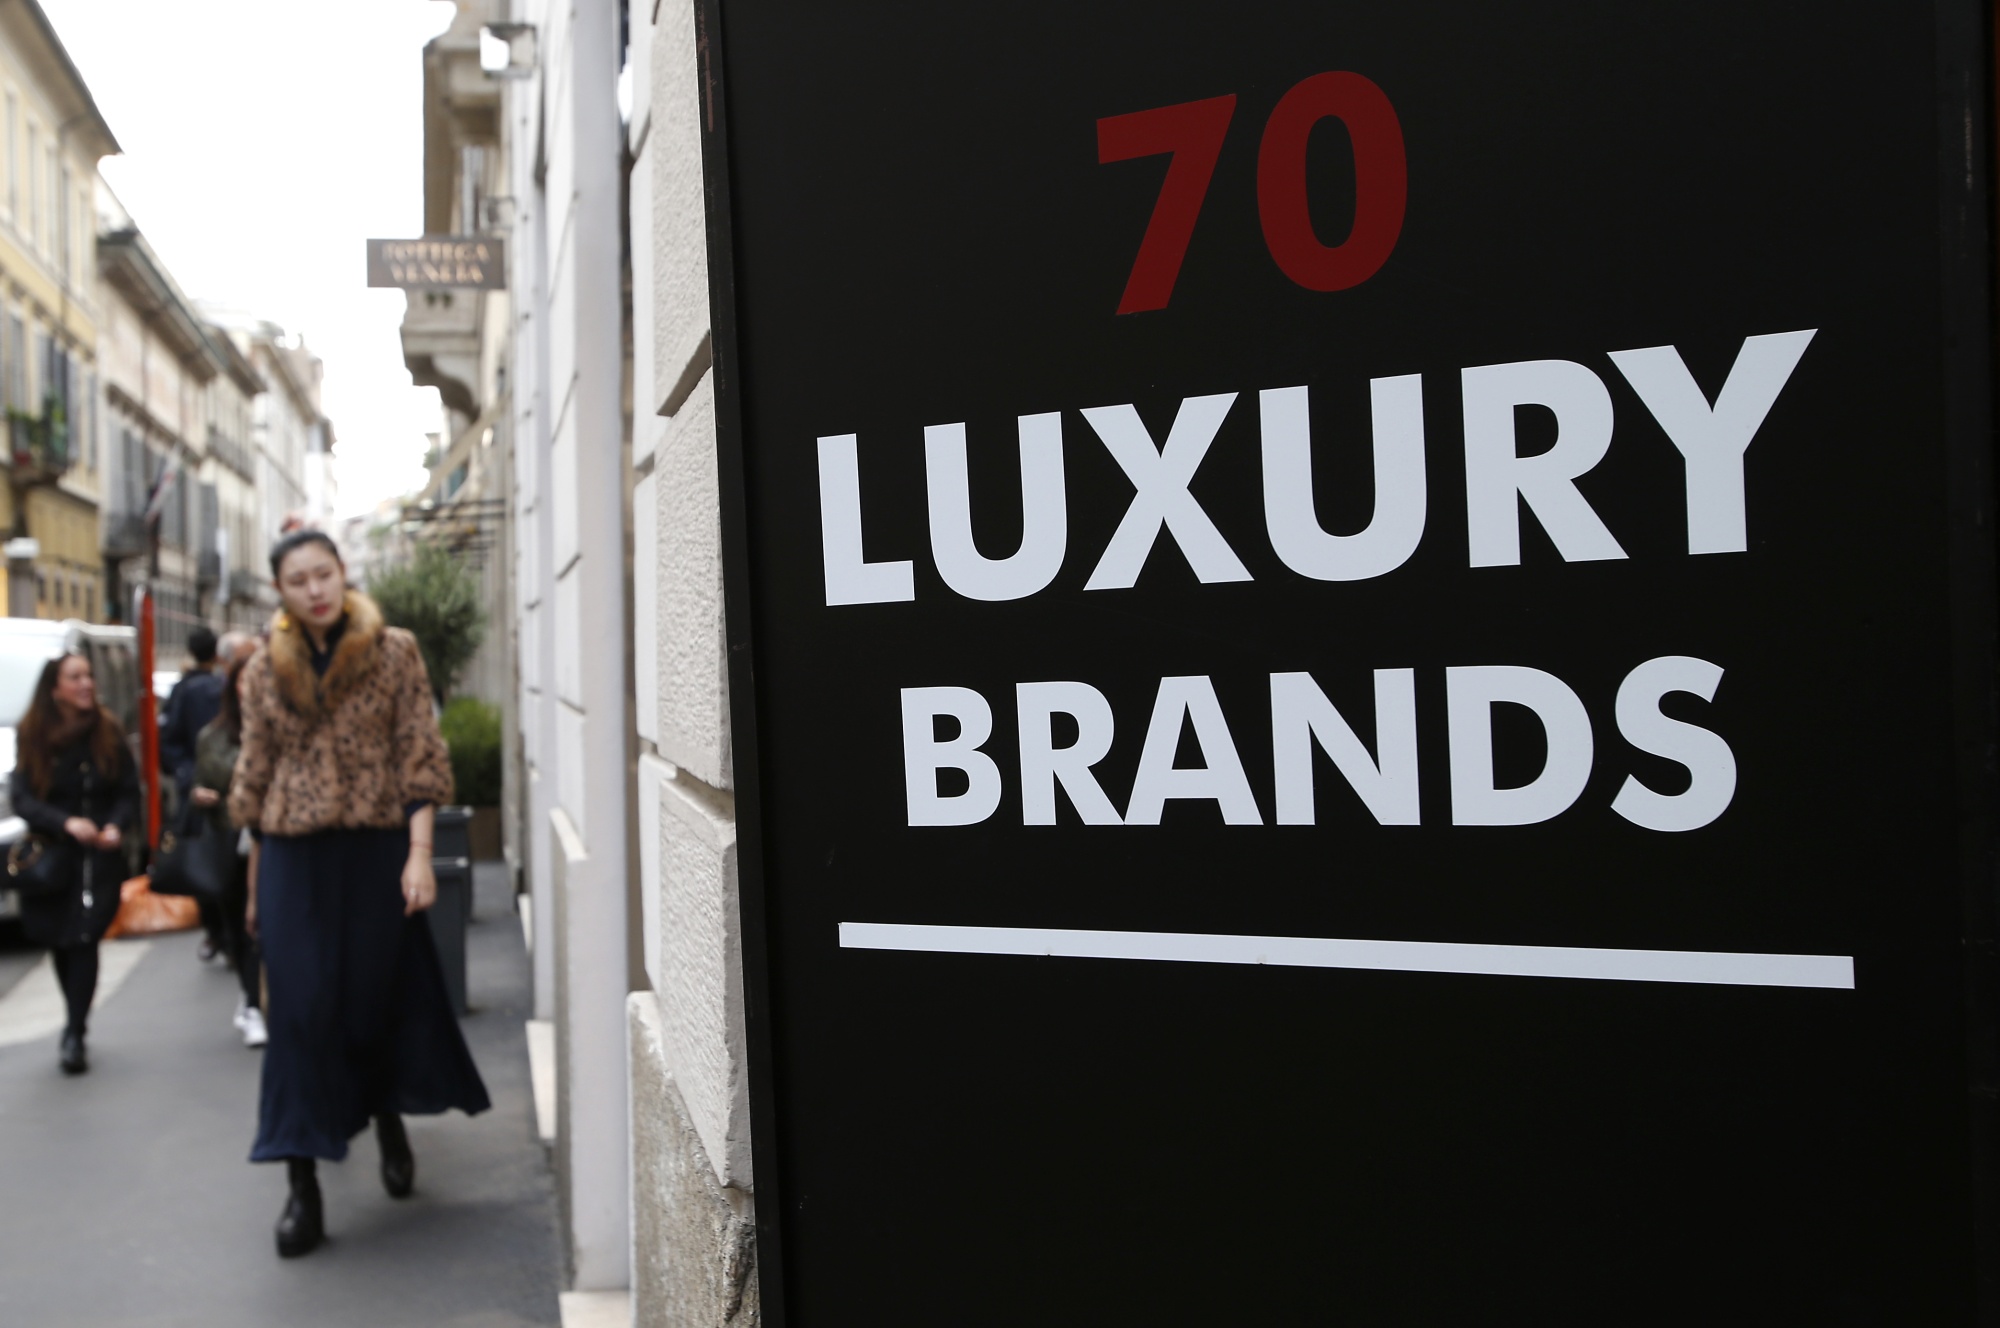 American fashion brands are coming for the luxury market